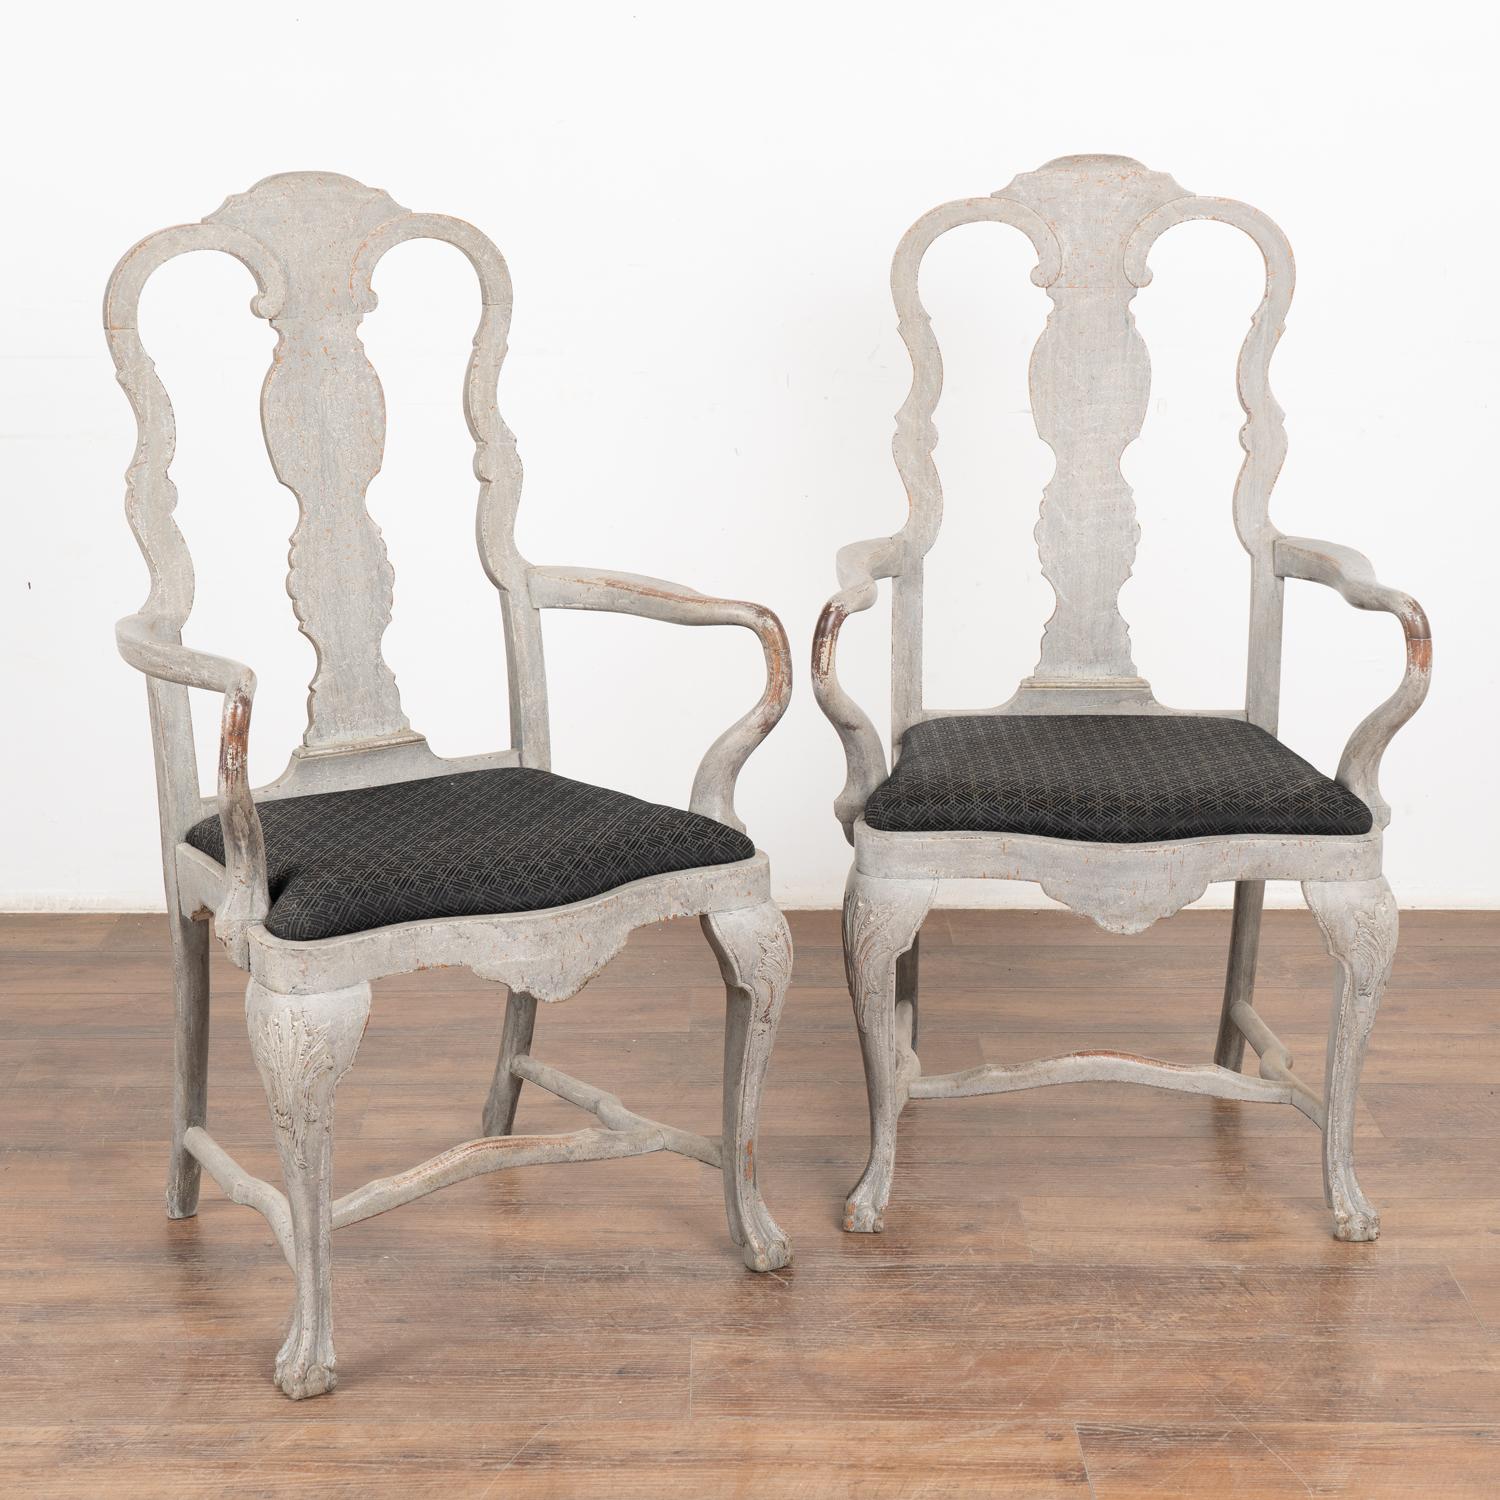 Filled with curves and graceful lines, this pair of Rococo style Swedish arm chairs have a soft gray painted finish.
Distress to the dove gray painted finish is seen throughout, in particular around the arm rests.
The upholstered seats pop out, so